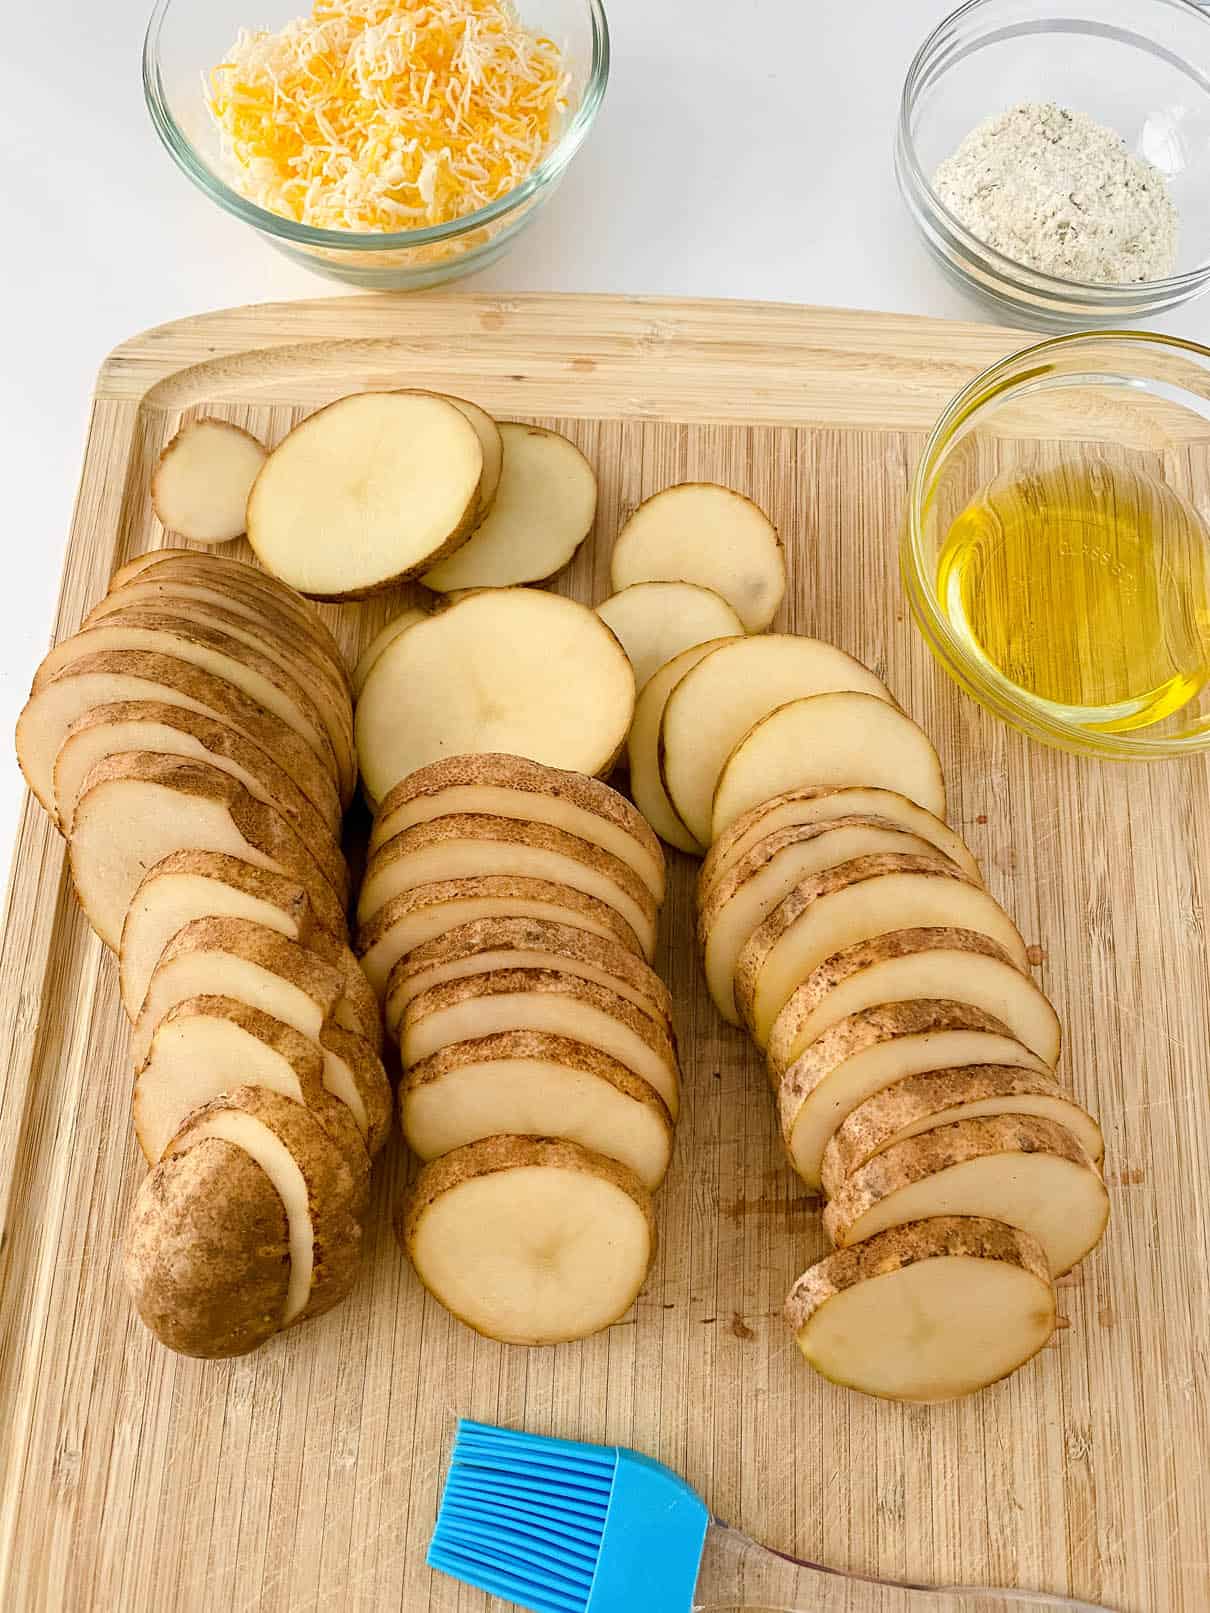 Cutting russet potatoes in thin slices, on a wooden cutting board